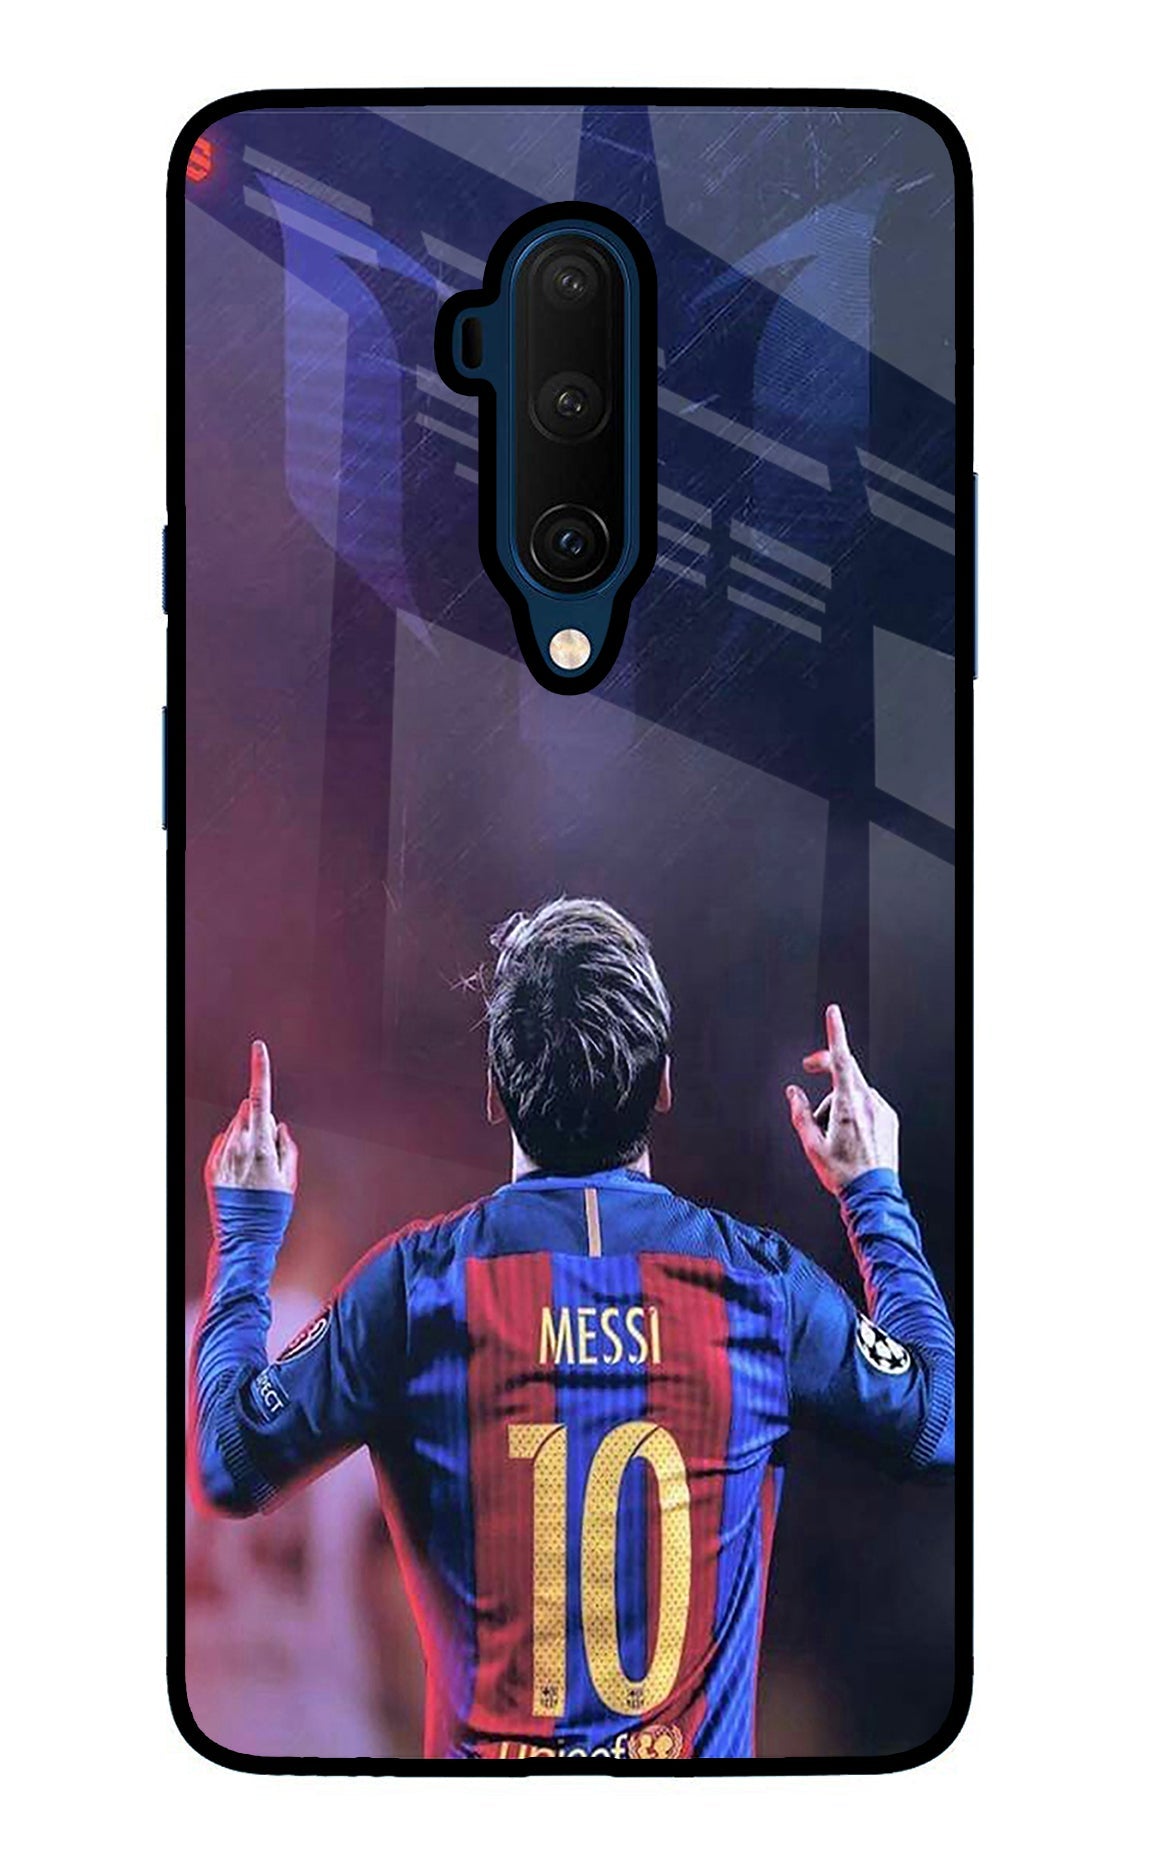 Messi Oneplus 7T Pro Glass Case